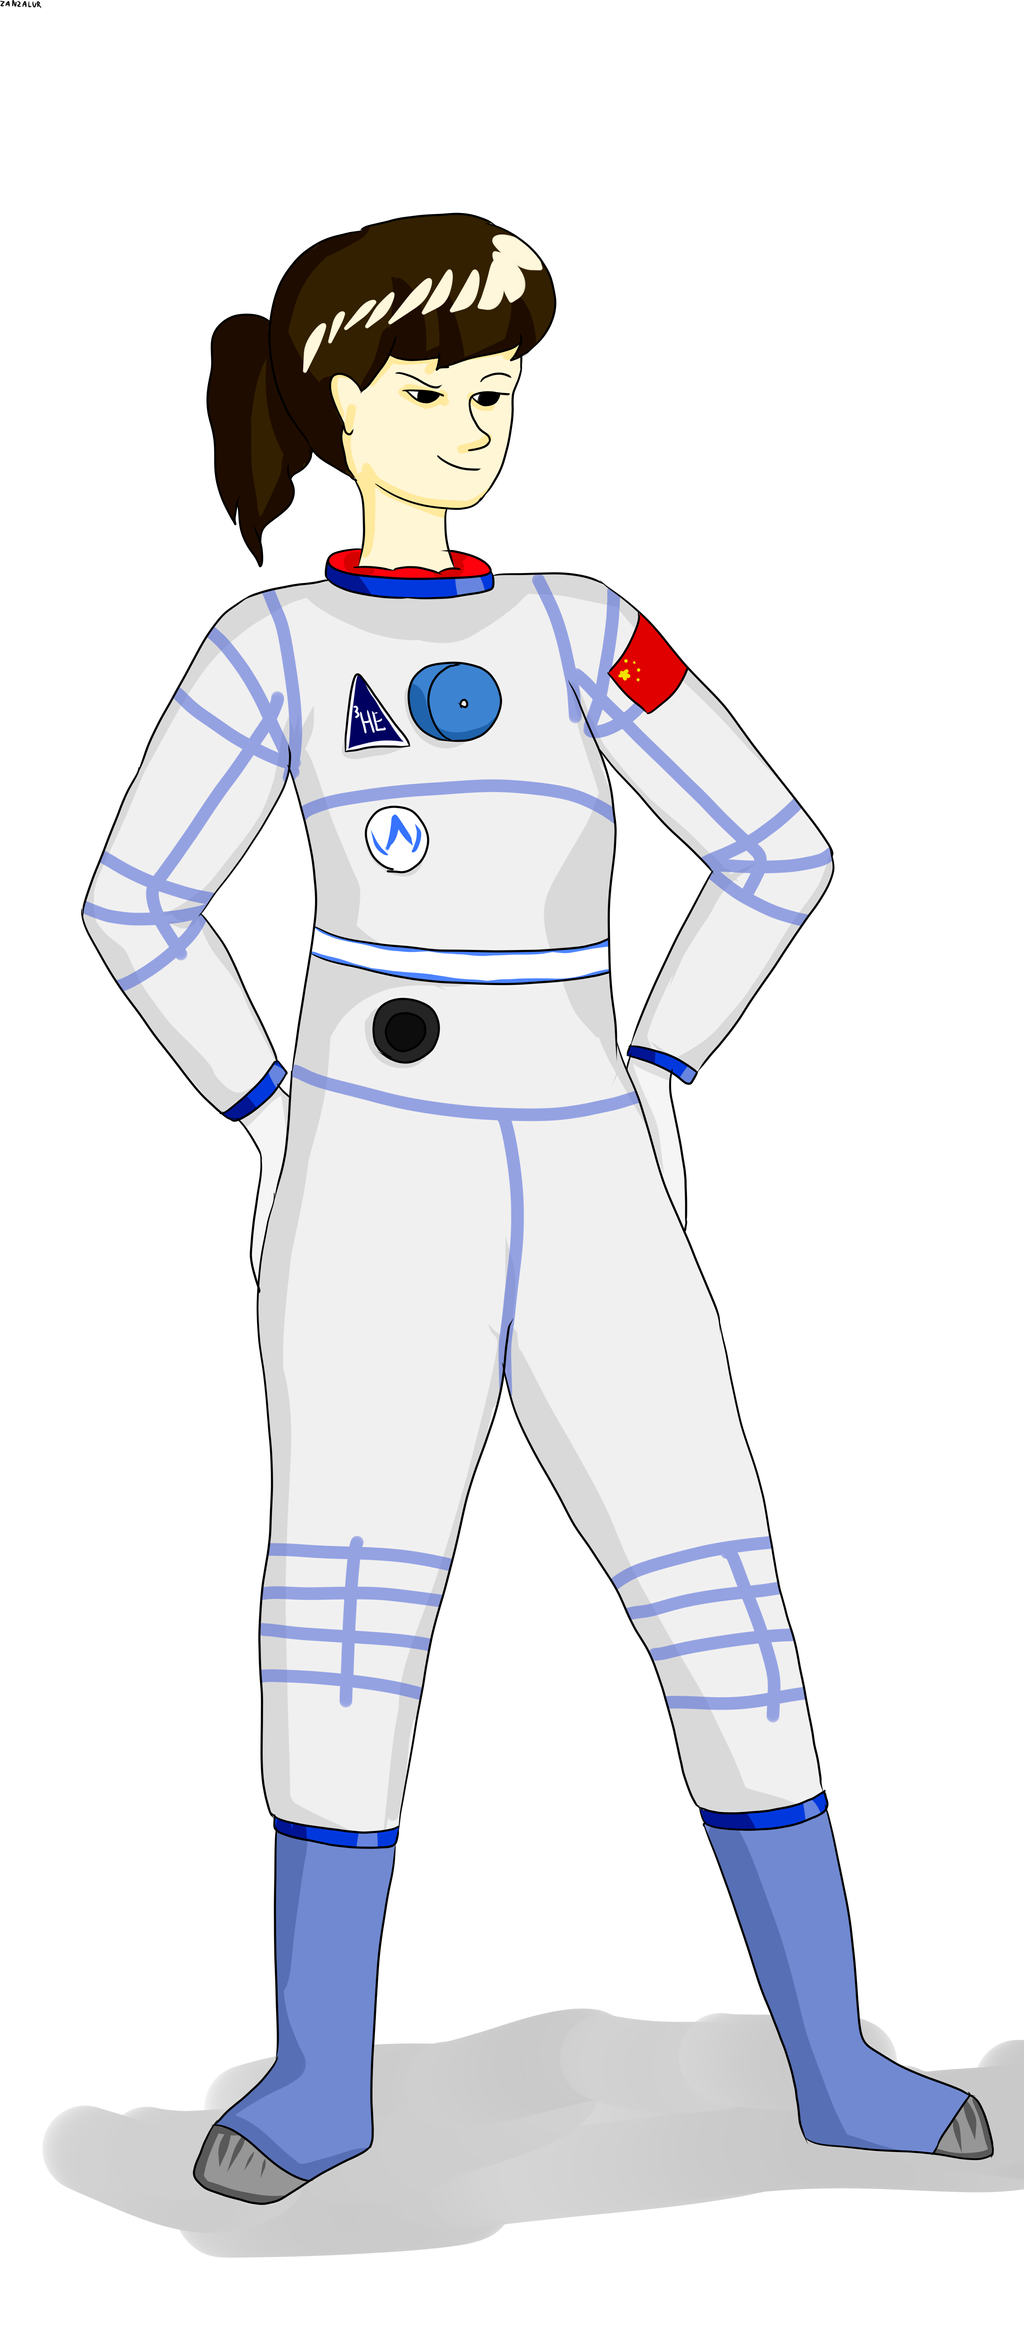 helium_3_miner_by_zanzalur-dcns3fv.png